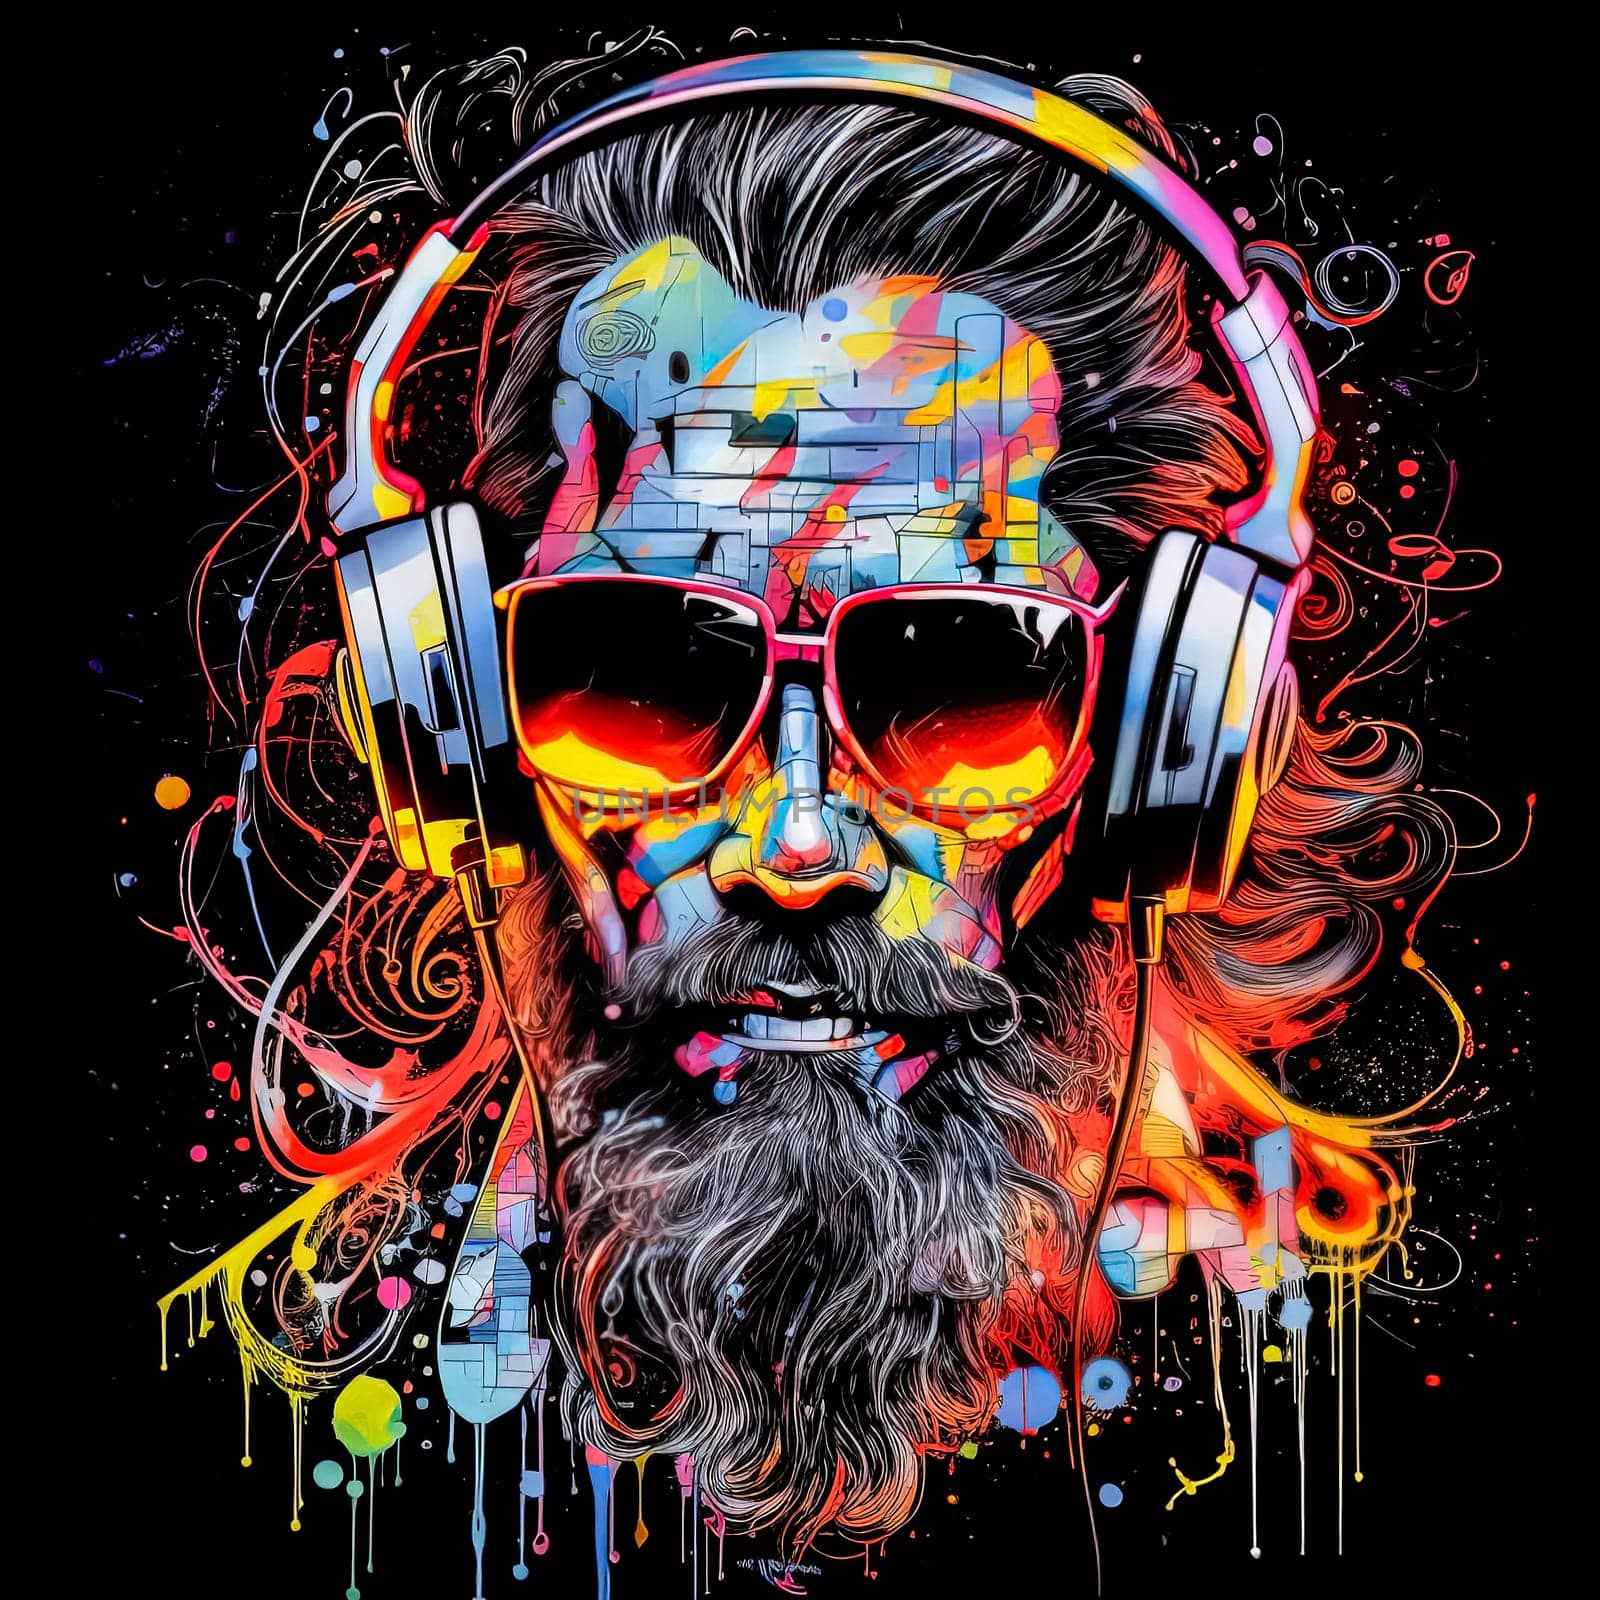 A man with a beard and sunglasses is wearing headphones. The image has a cool, futuristic vibe